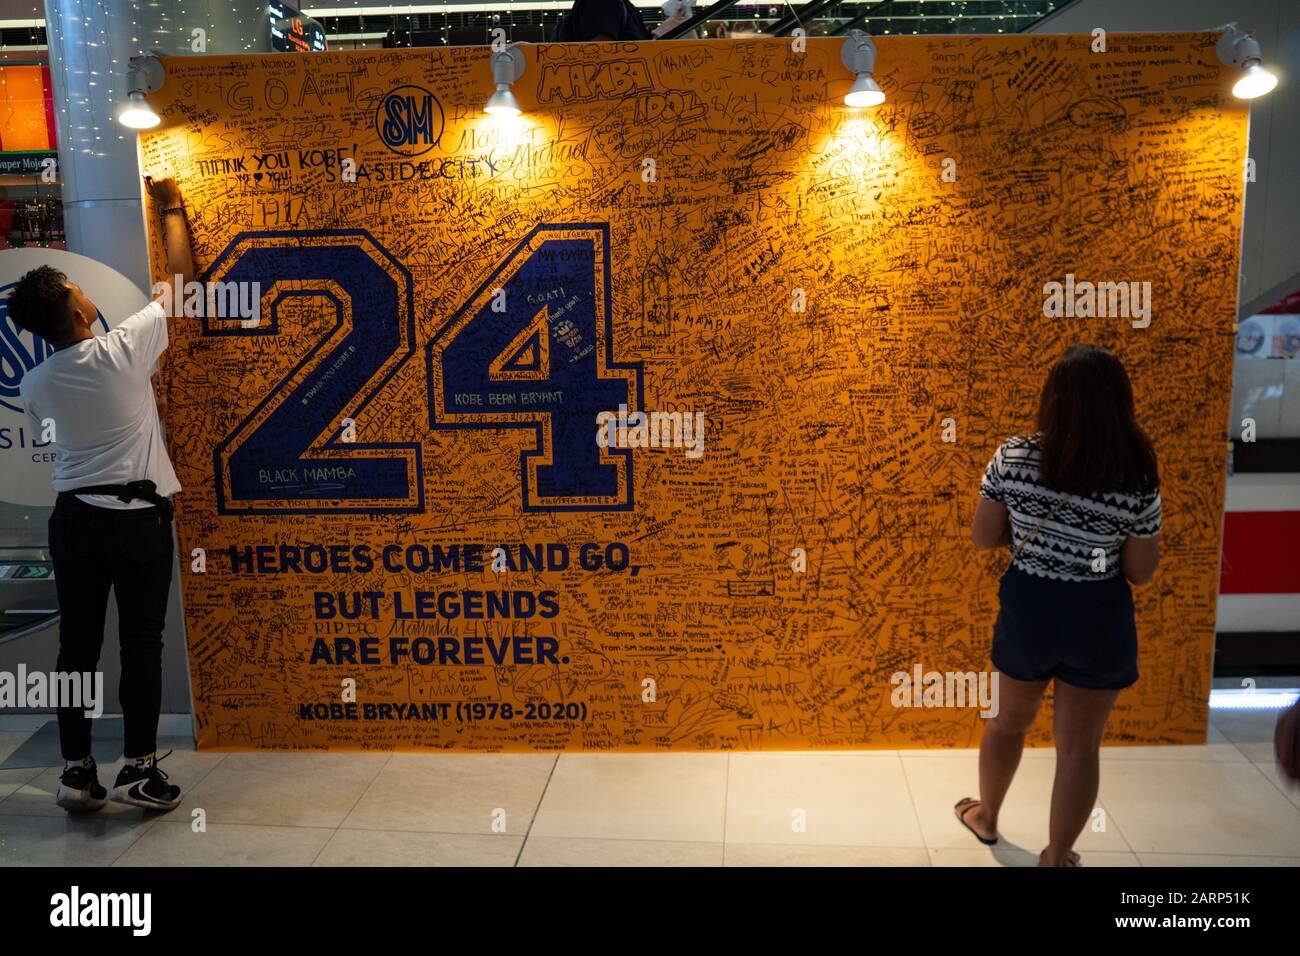 Cebu City, Philippines. 29th Jan, 2020. Basketball fans pay tribute to the late basketball legend Kobe Bryant, writing personal messages on a tribute board to basketball player Koby Bryant at the SM Seaside shopping mall. With Basketball being the most popular sport in the Philippines many Filipinos have been coming to terms with the sad passing of the Basketball legend. Credit: imagegallery2/Alamy Live News Stock Photo